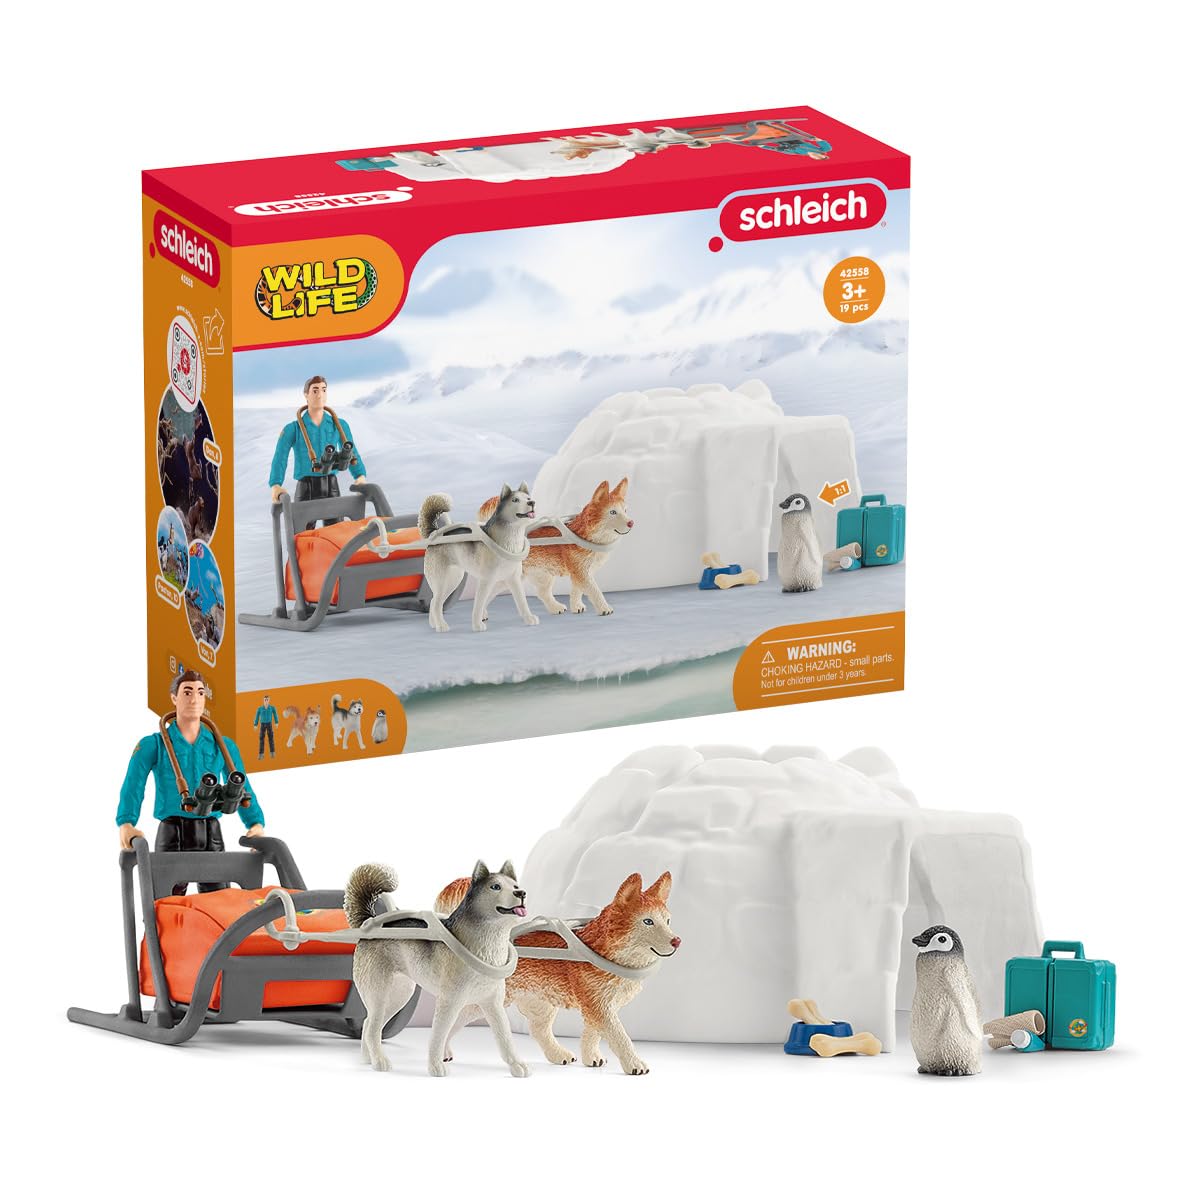 Schleich Wild Life Wild Animal Toy Playset for Boys and Girls Ages 3+, Antarctic Expedition with Arctic Animals